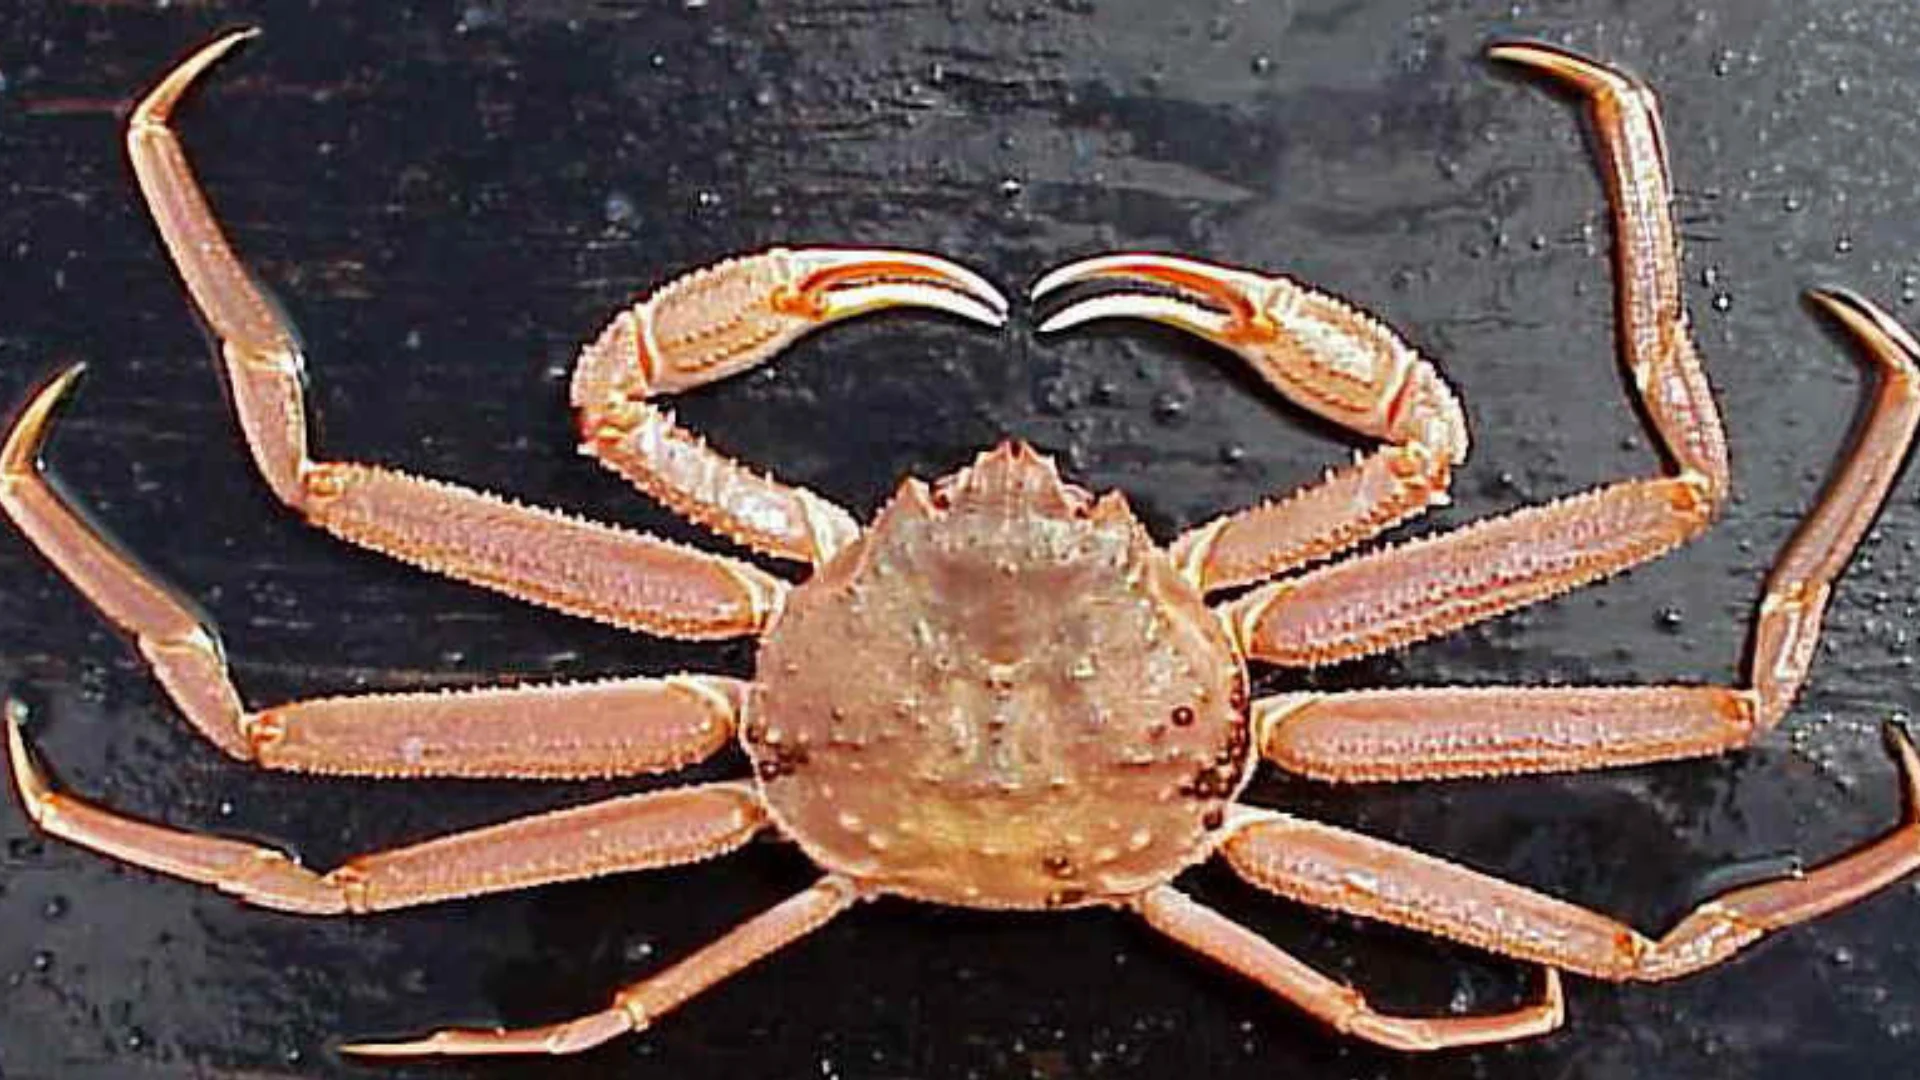 10 billion snow crabs vanished off the Alaskan coast: Here's the grim cause